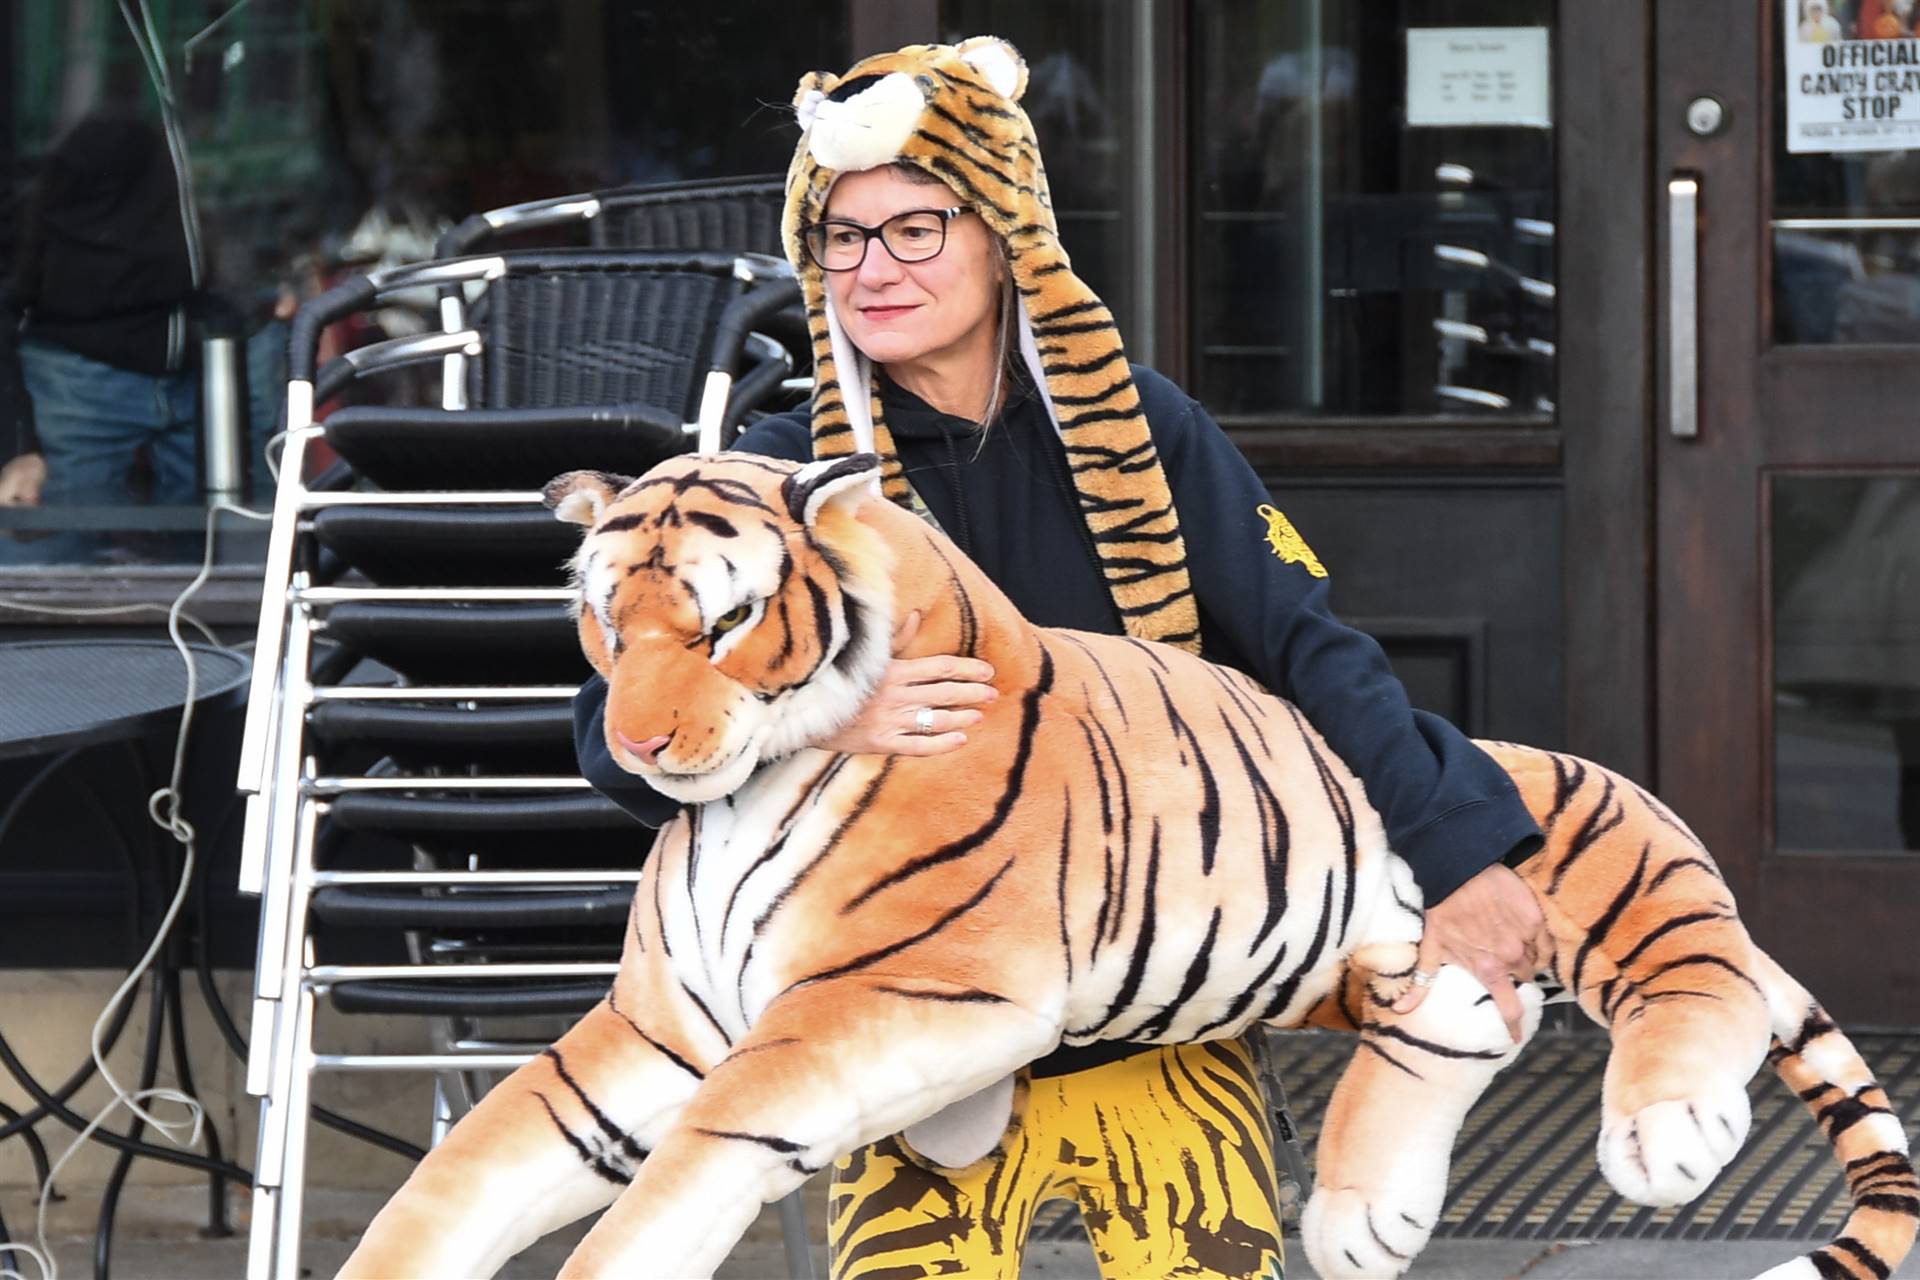 Woman with tiger